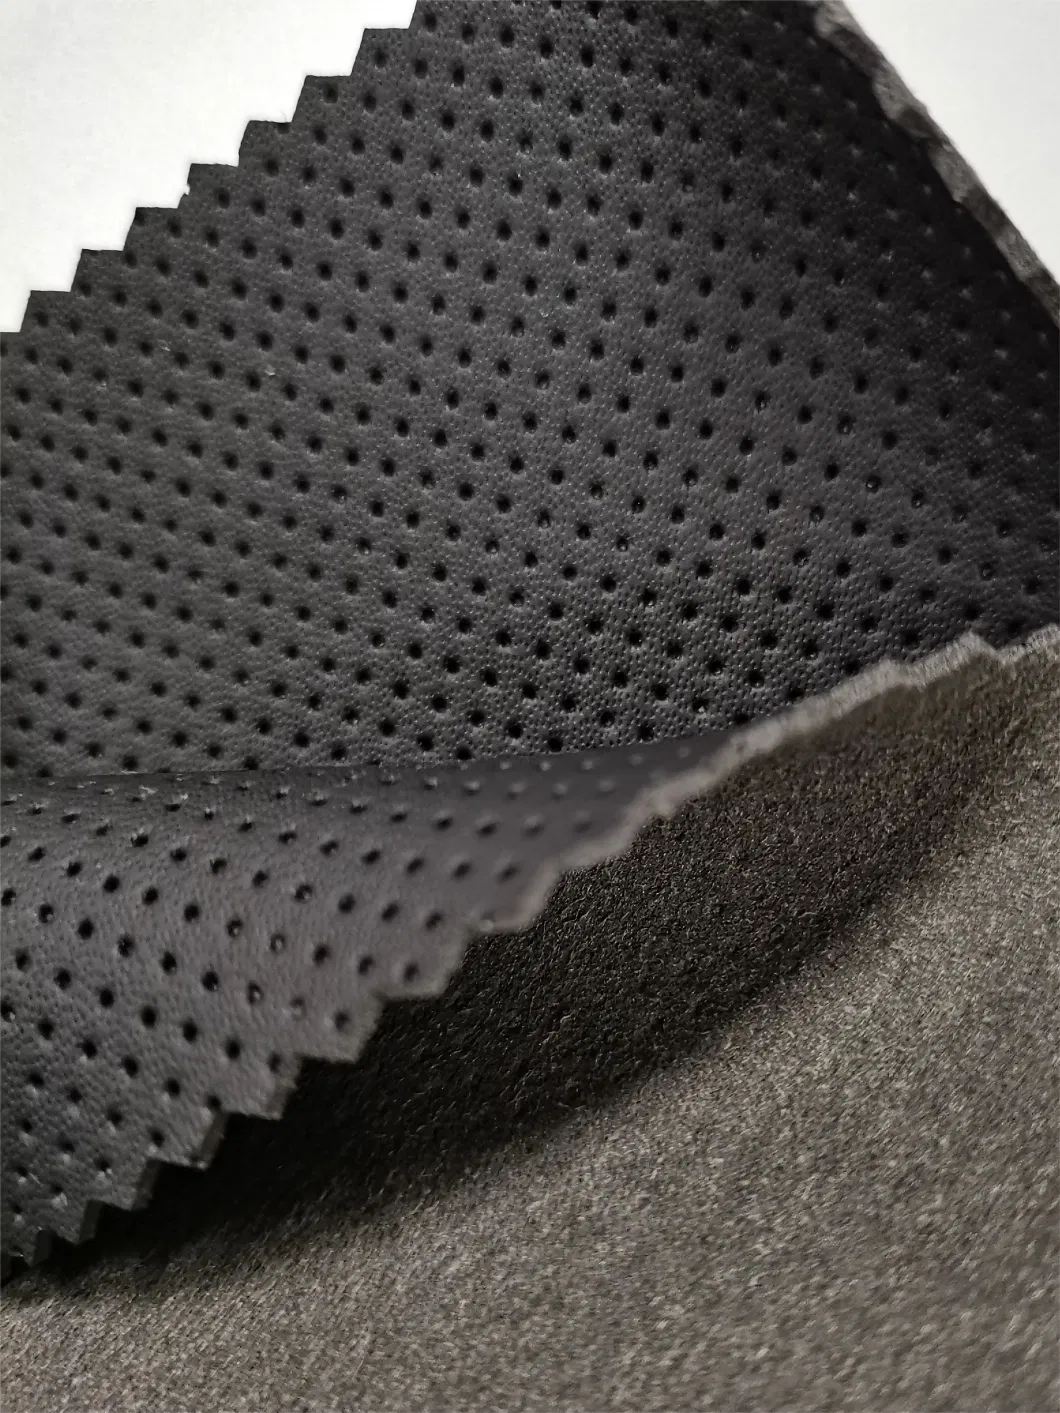 Microfiber Leather Automotive Huafon High Quality Fire Resistant Perforated Synthetic Leather